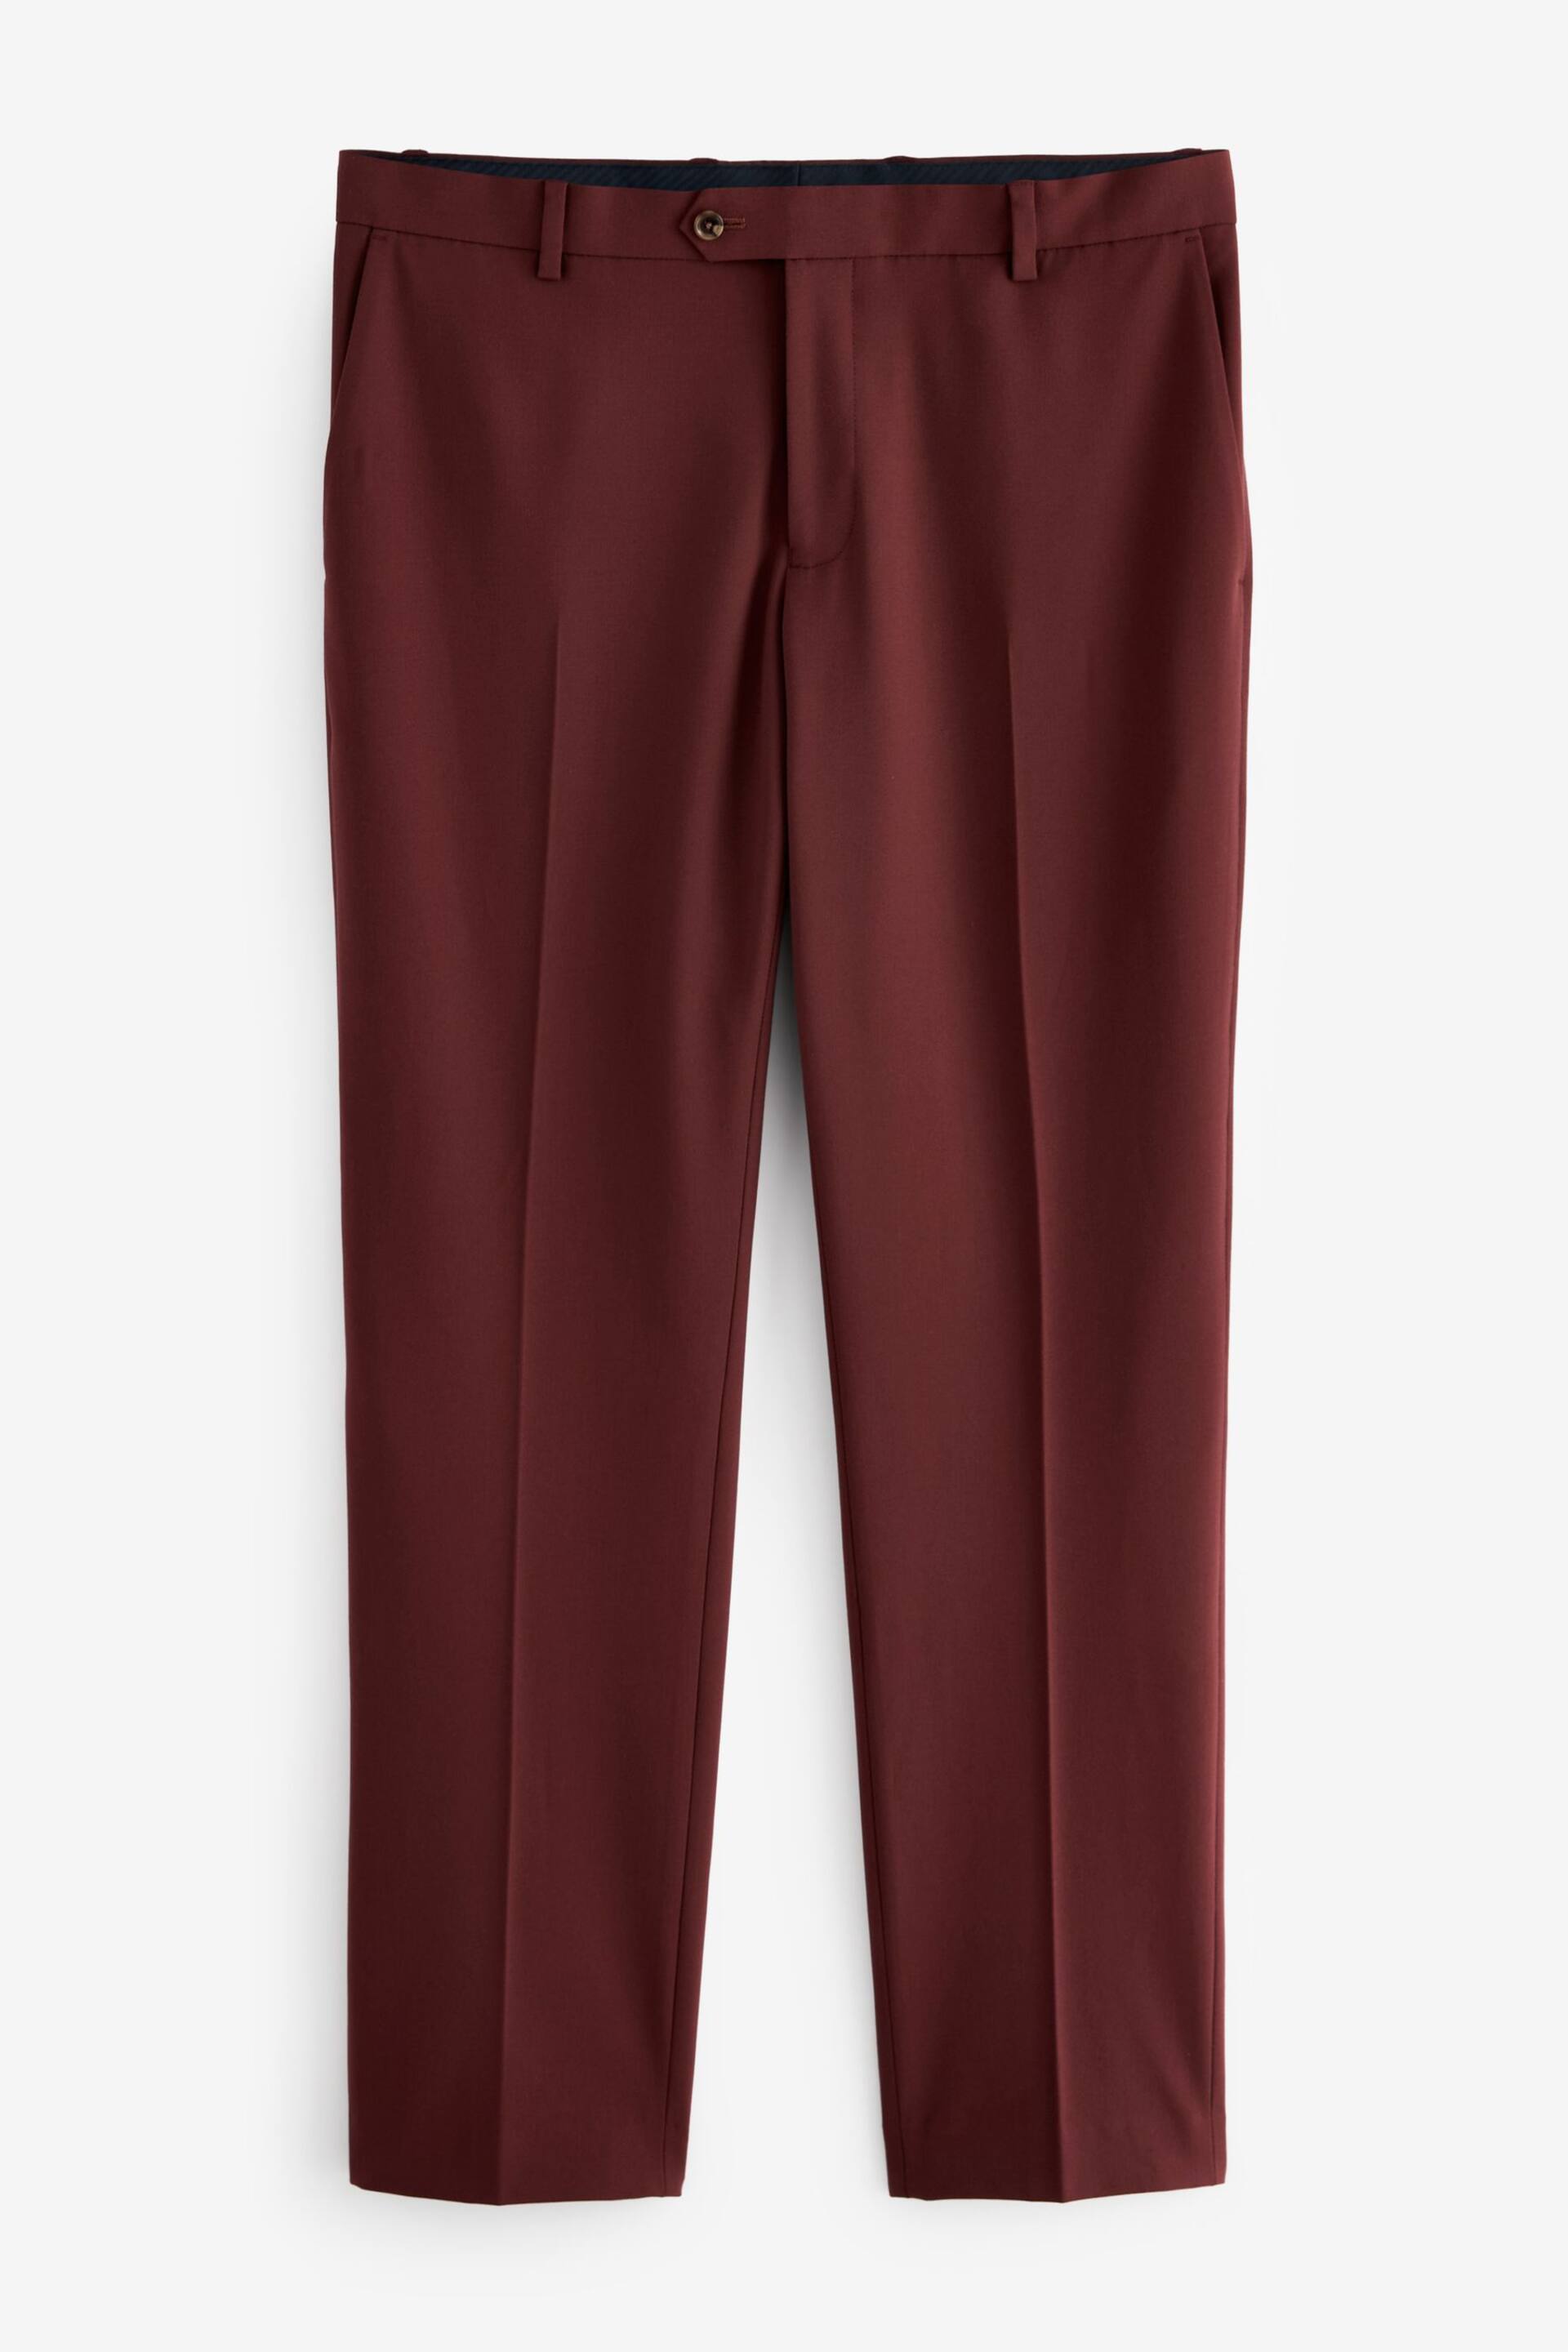 Brick Red Regular Fit Motionflex Stretch Suit: Trousers - Image 5 of 8